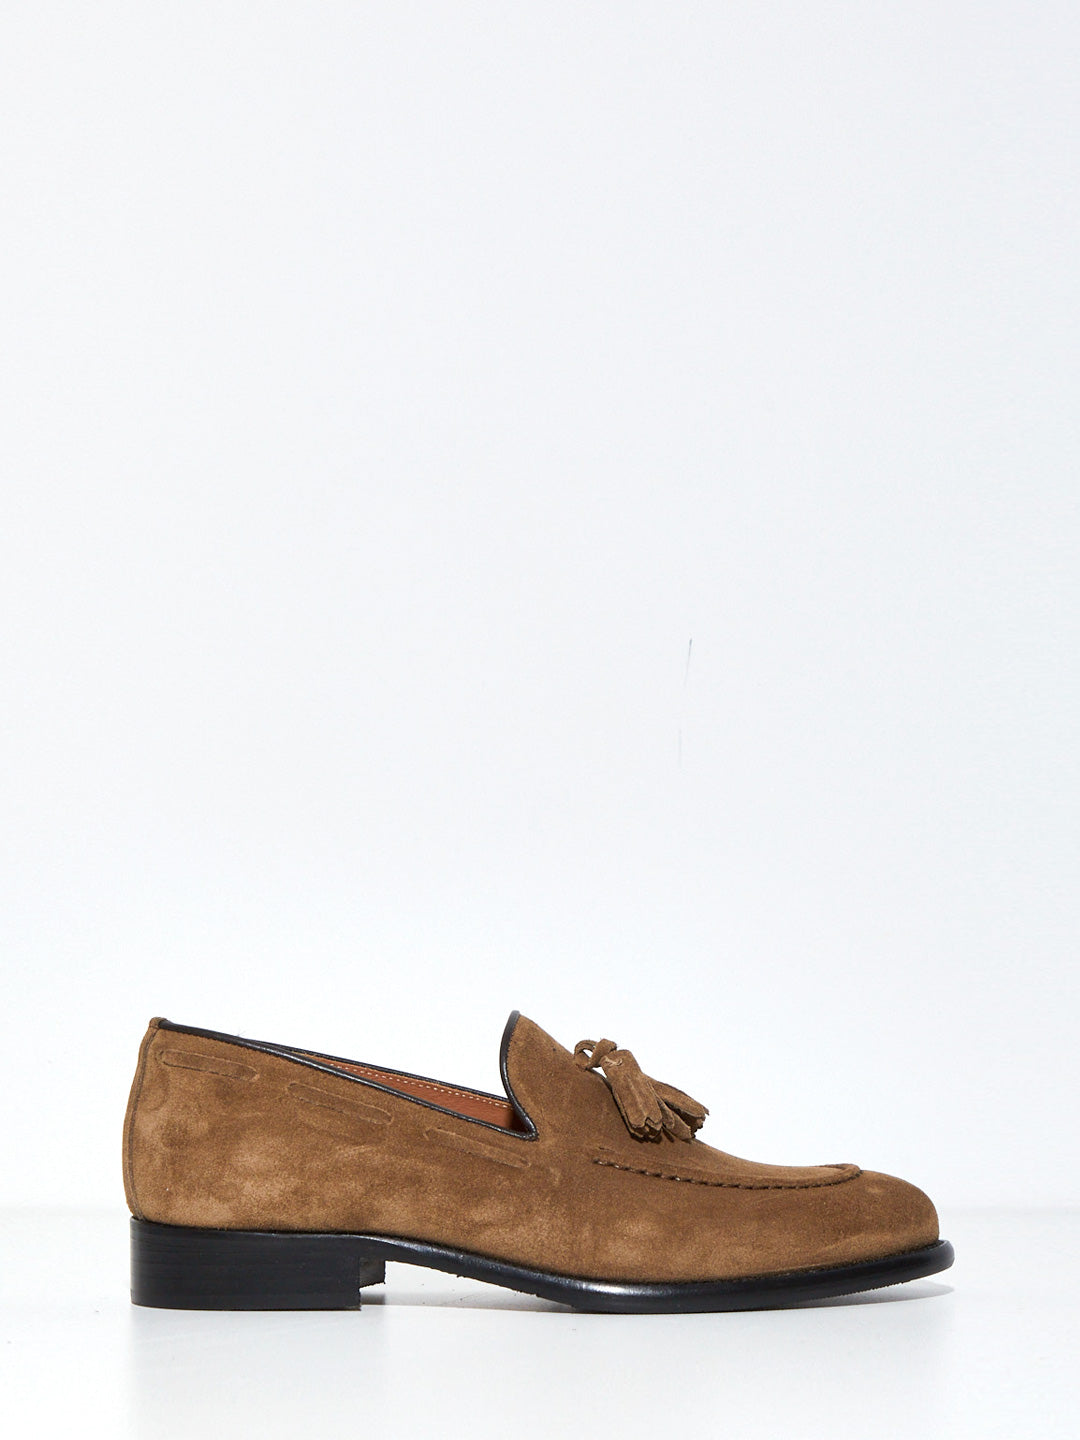 Uber Alles classic leather moccasin